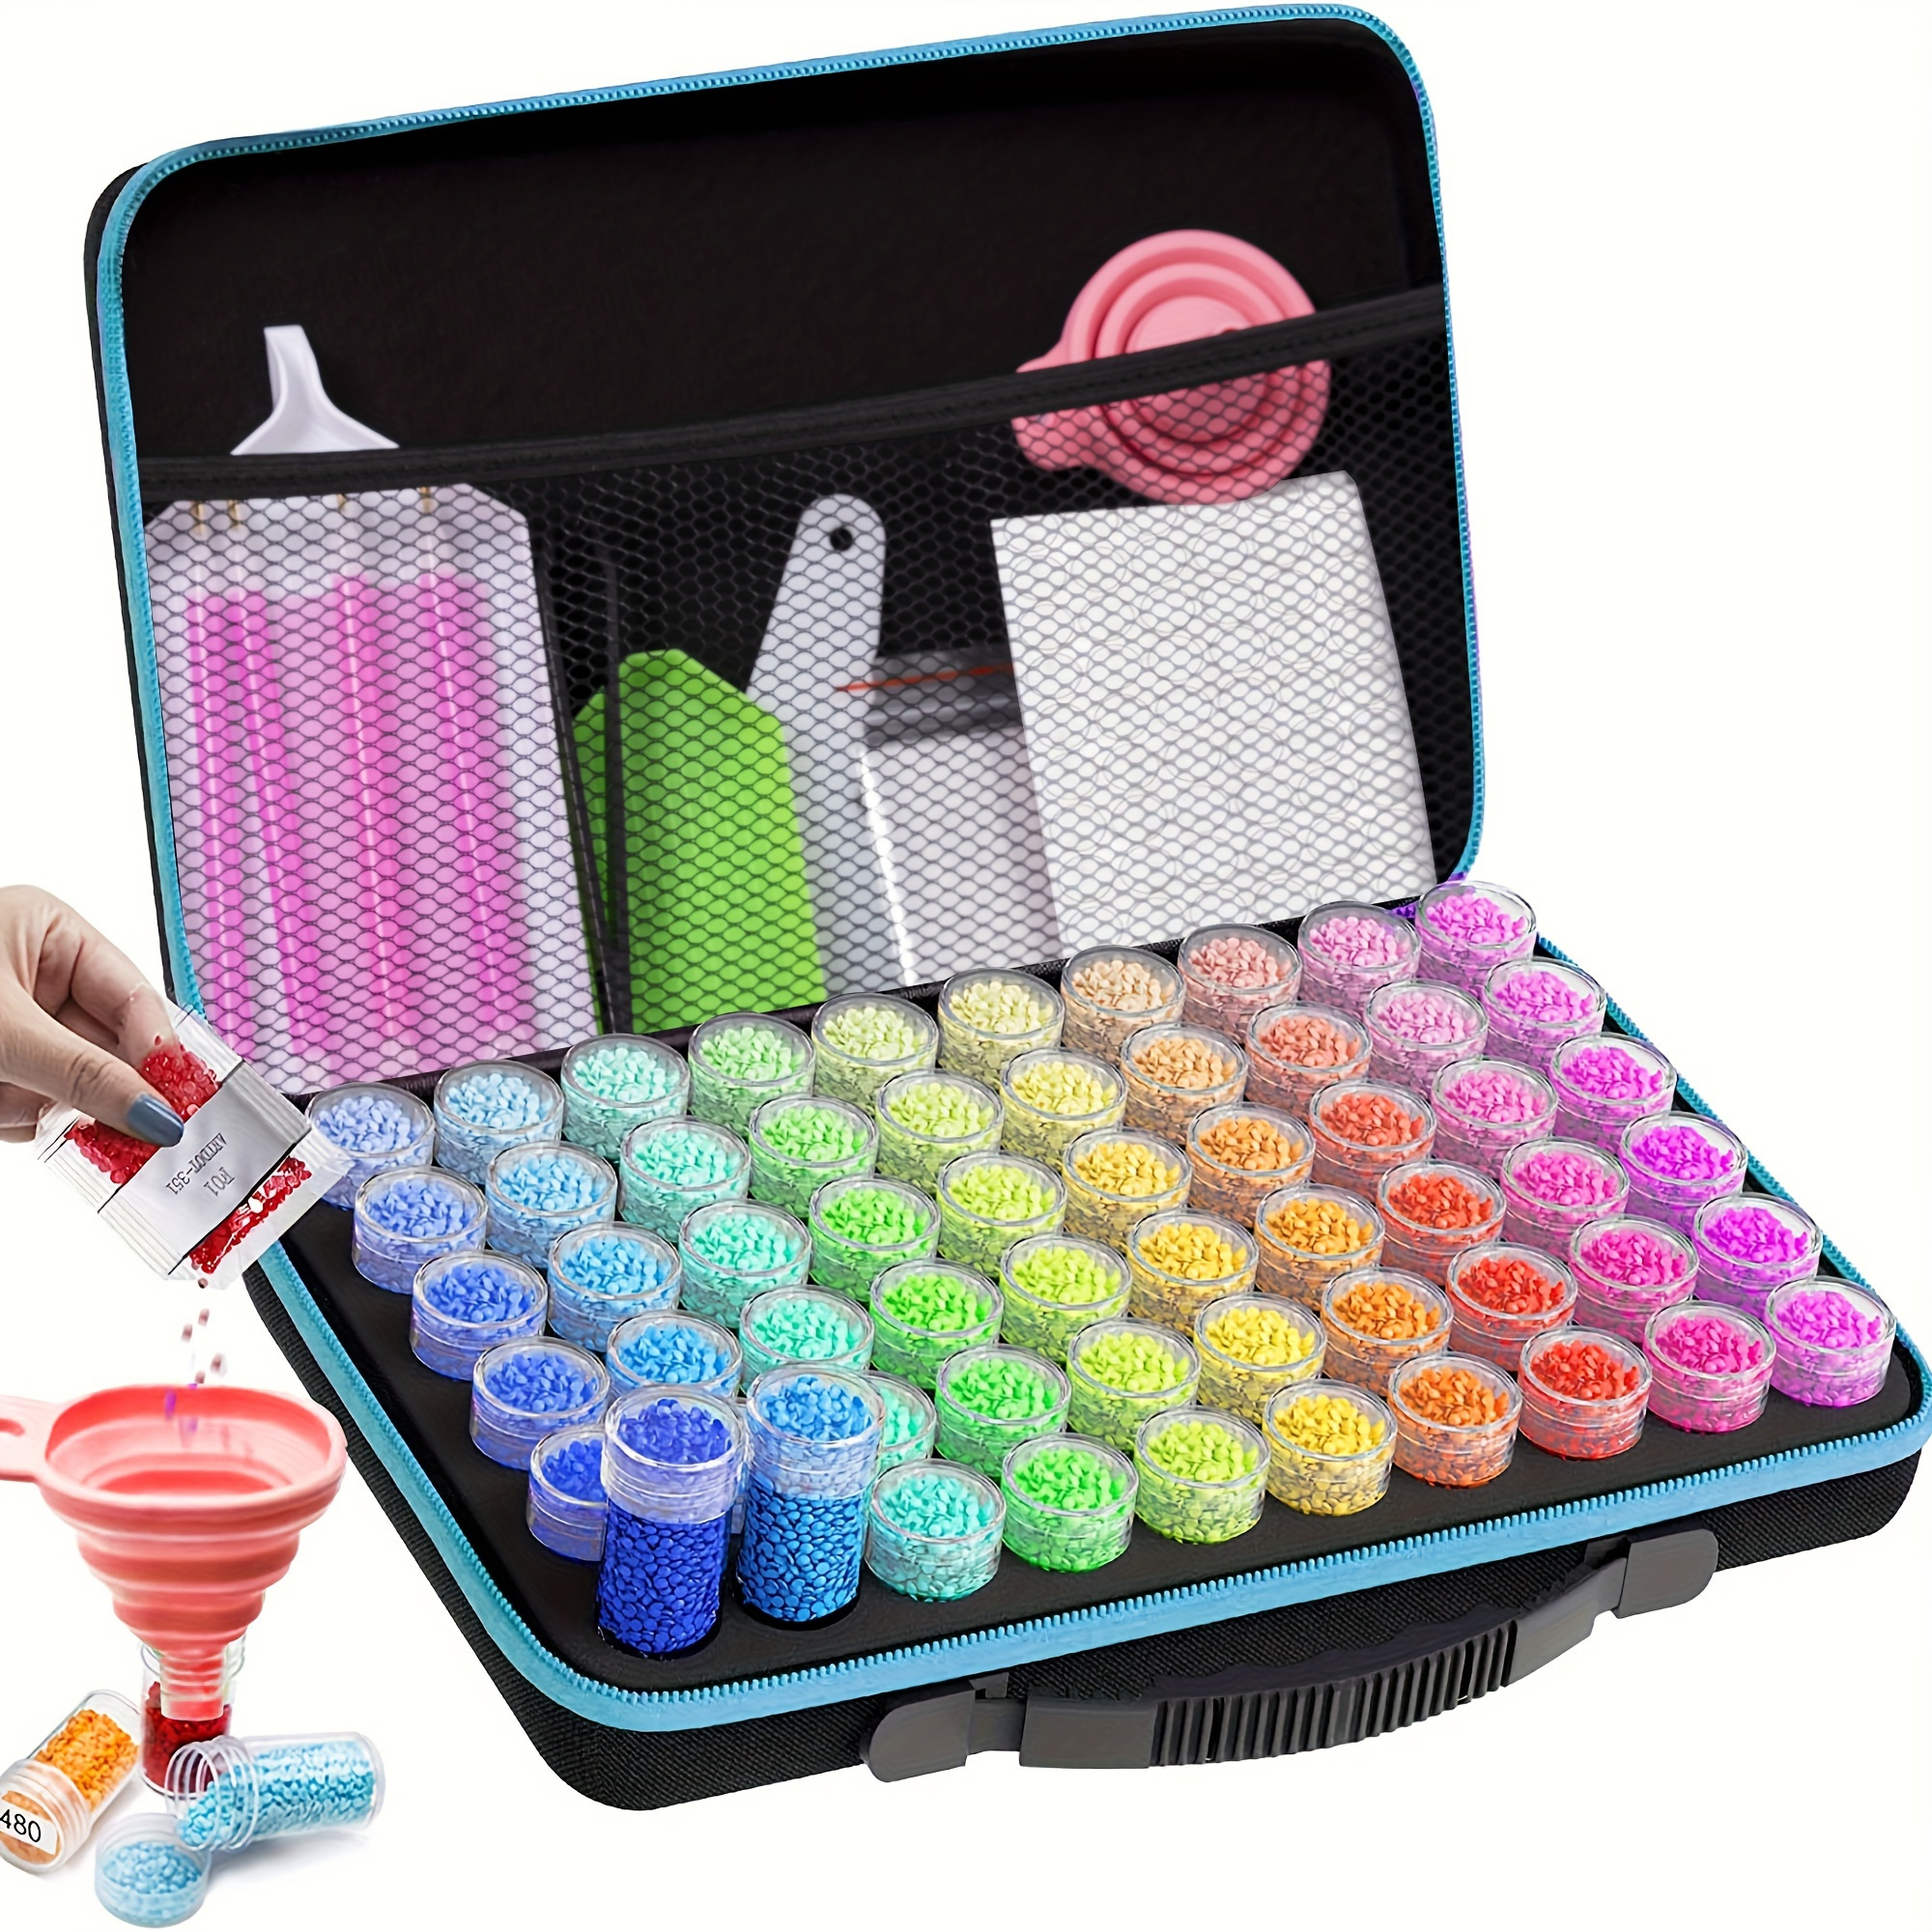 

Diamond Painting Accessory Organizer - Shockproof Storage Container With 30 & 60 Slots For Beads, Pendants & Sparkling Diamonds